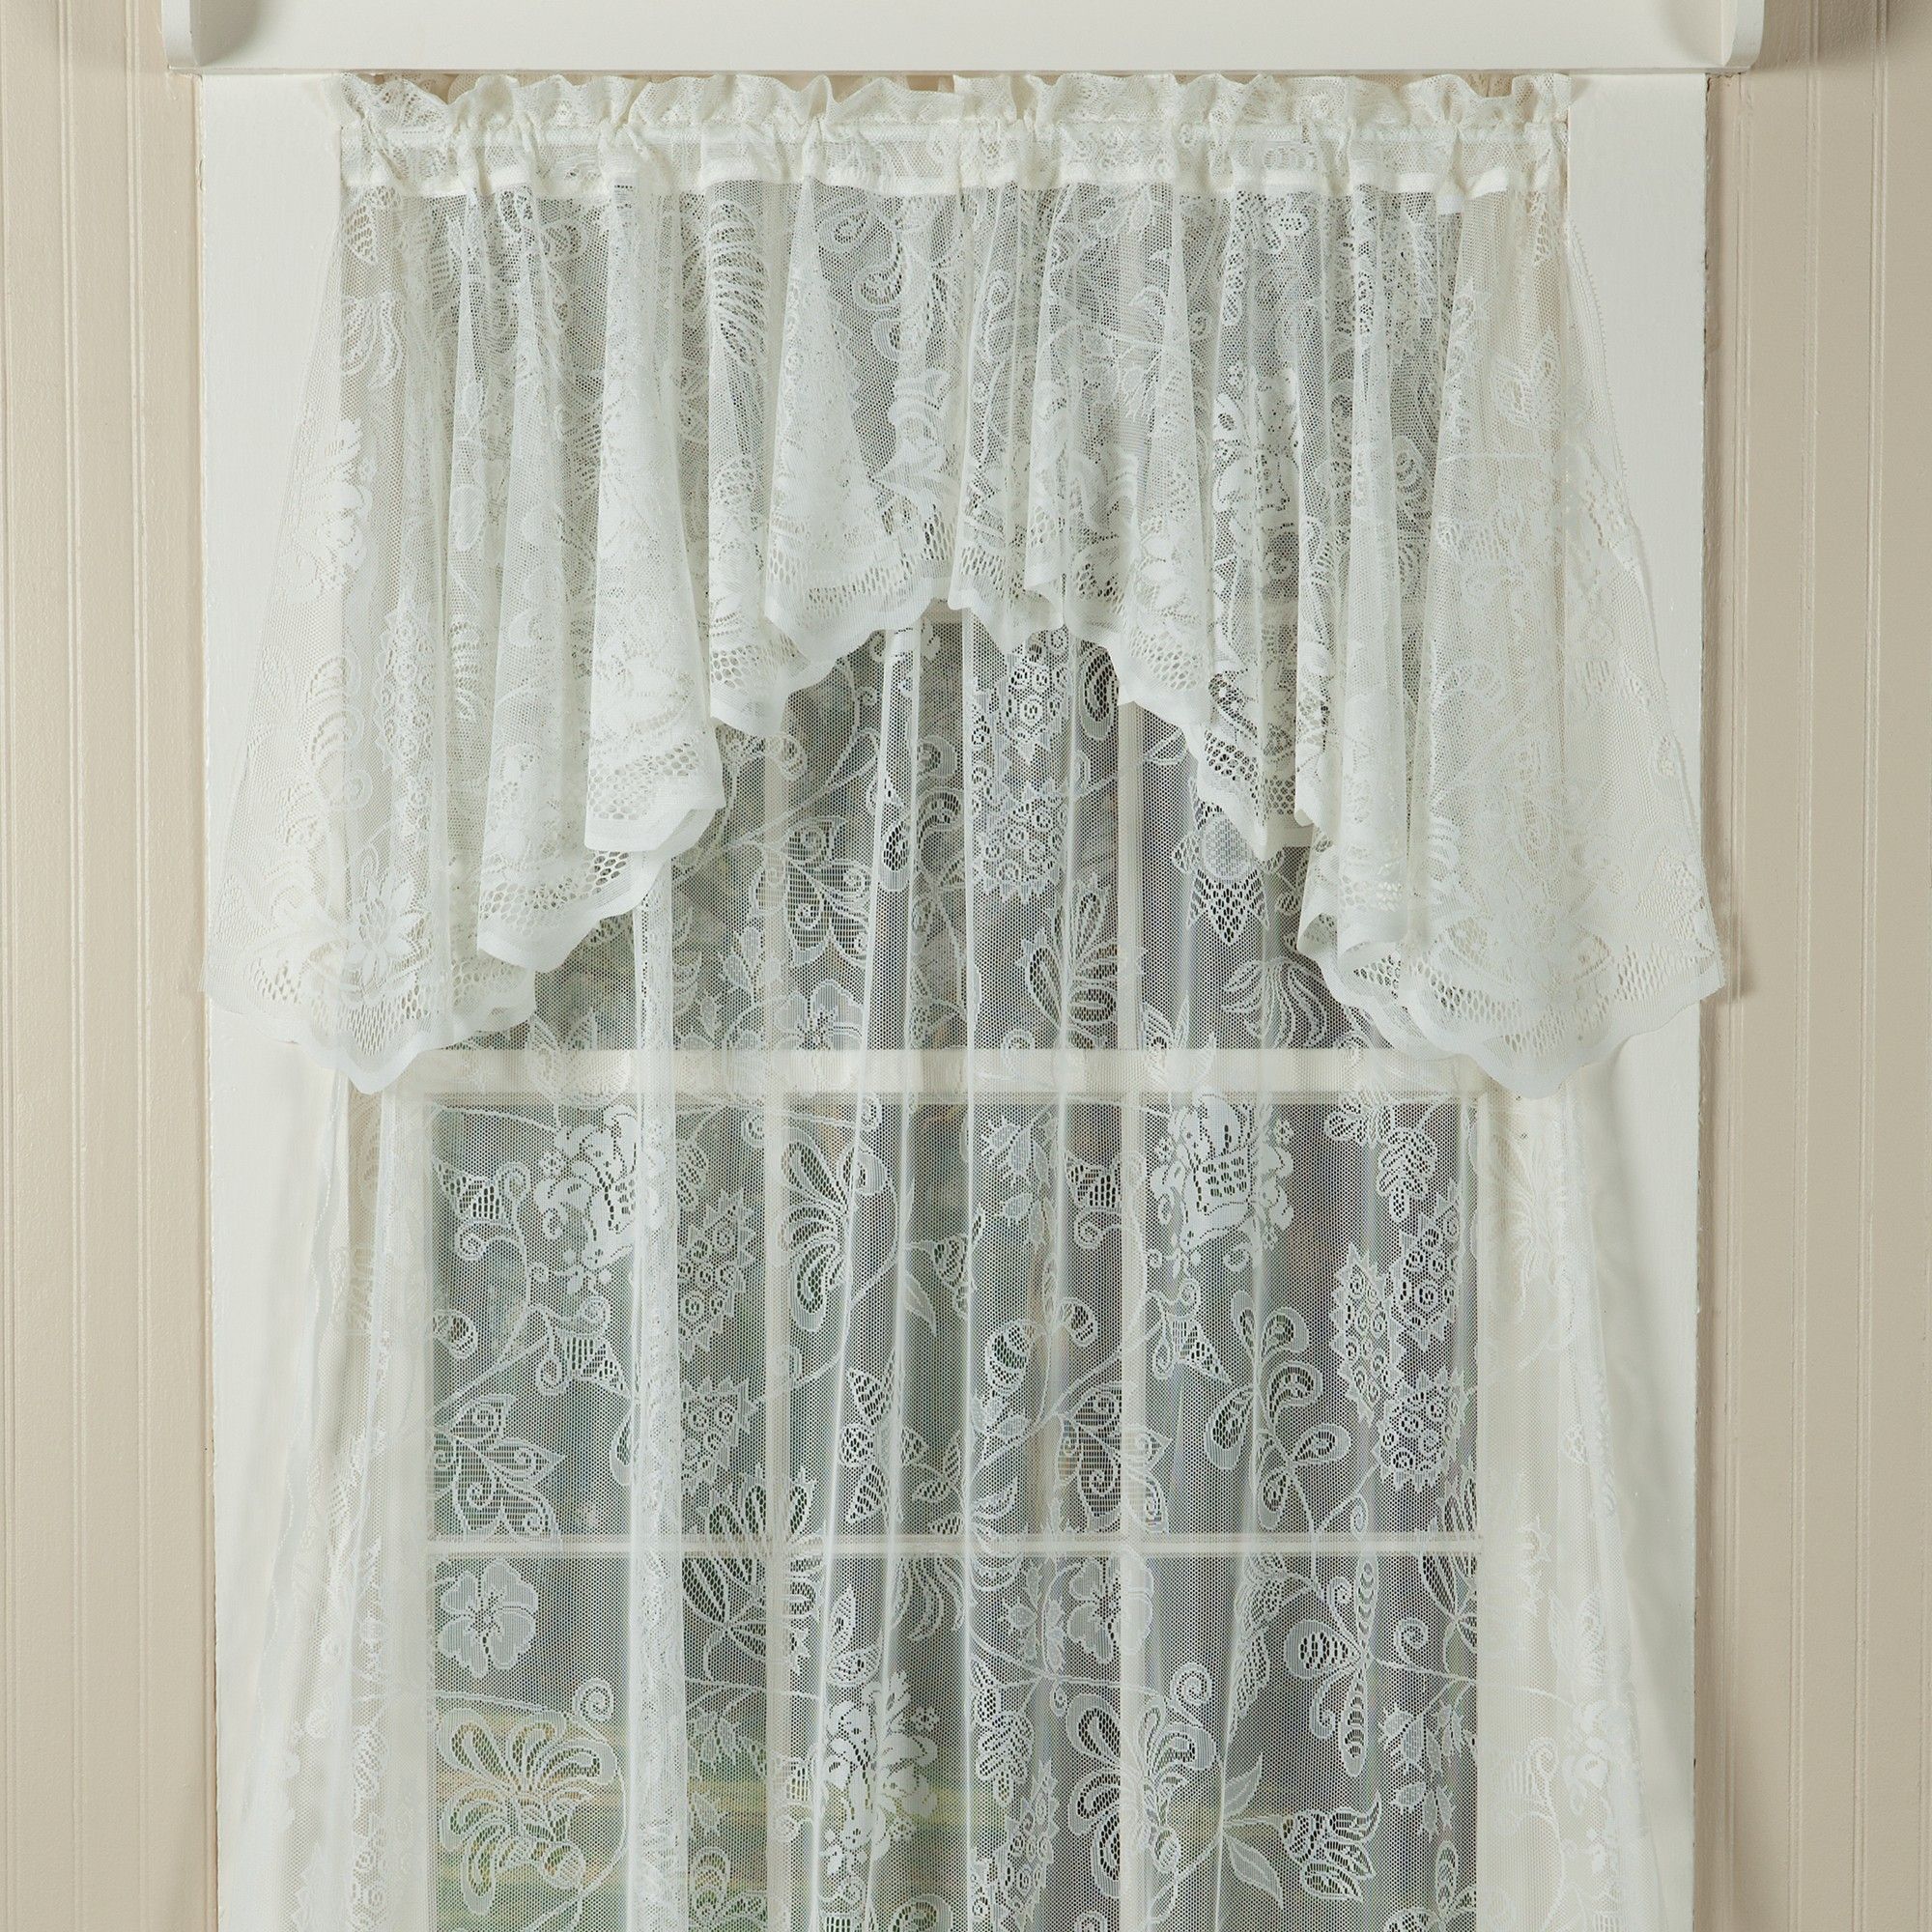 Jacobean Melody Lace Curtains Sturbridge Yankee Workshop Within Lace Curtains (View 21 of 25)